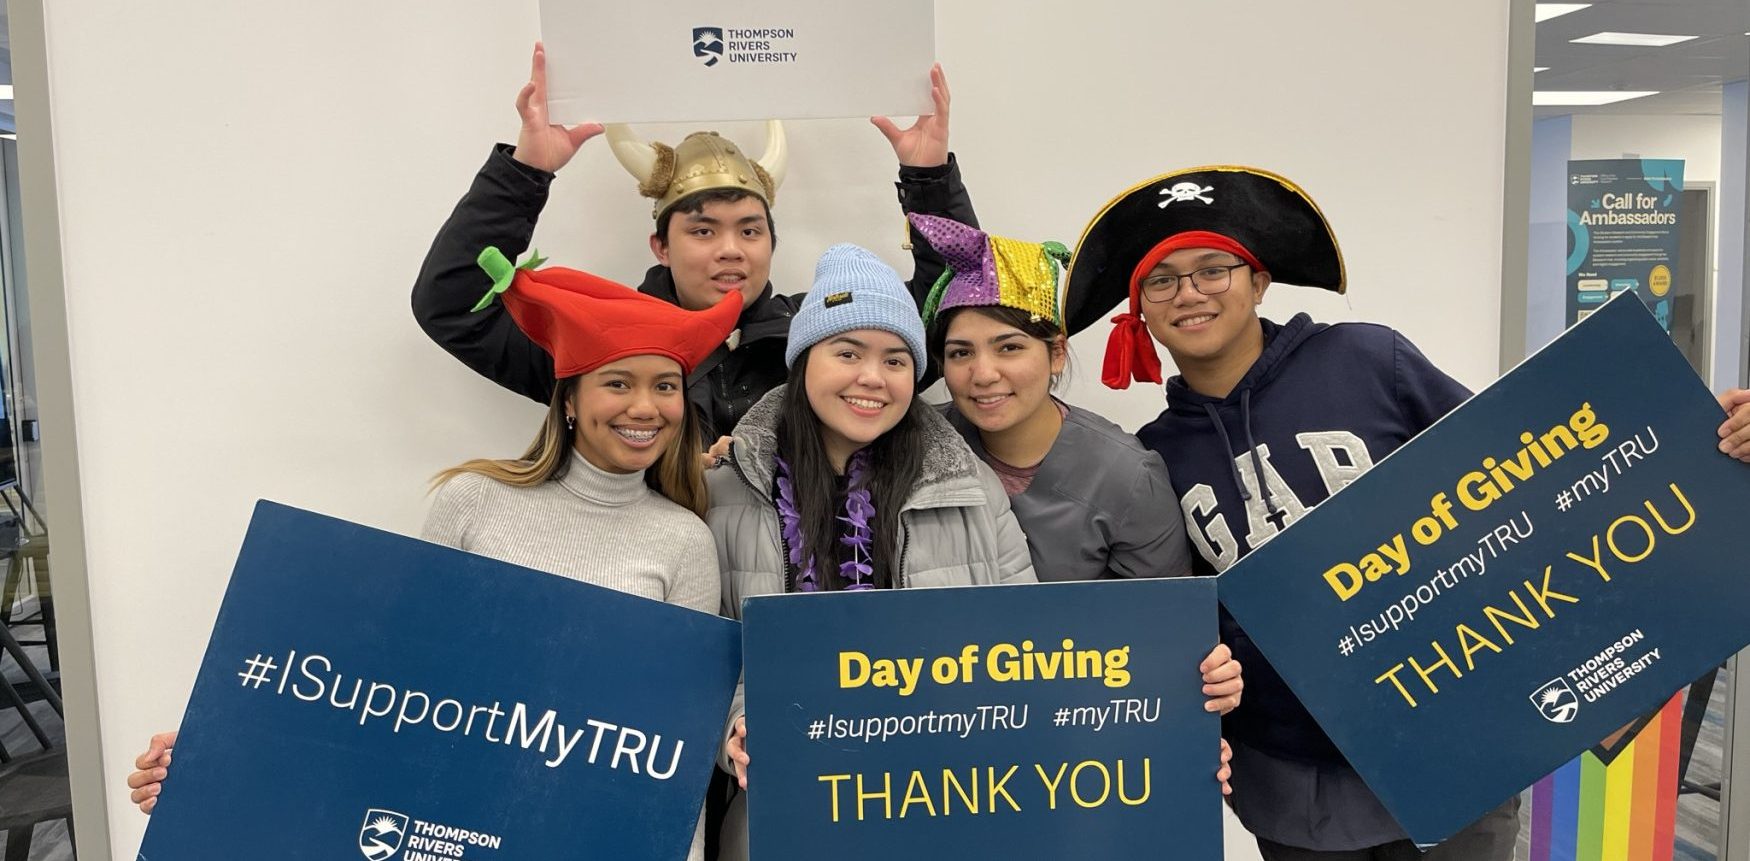 Day of Giving exceeds goal by over $33,000 – TRU Newsroom